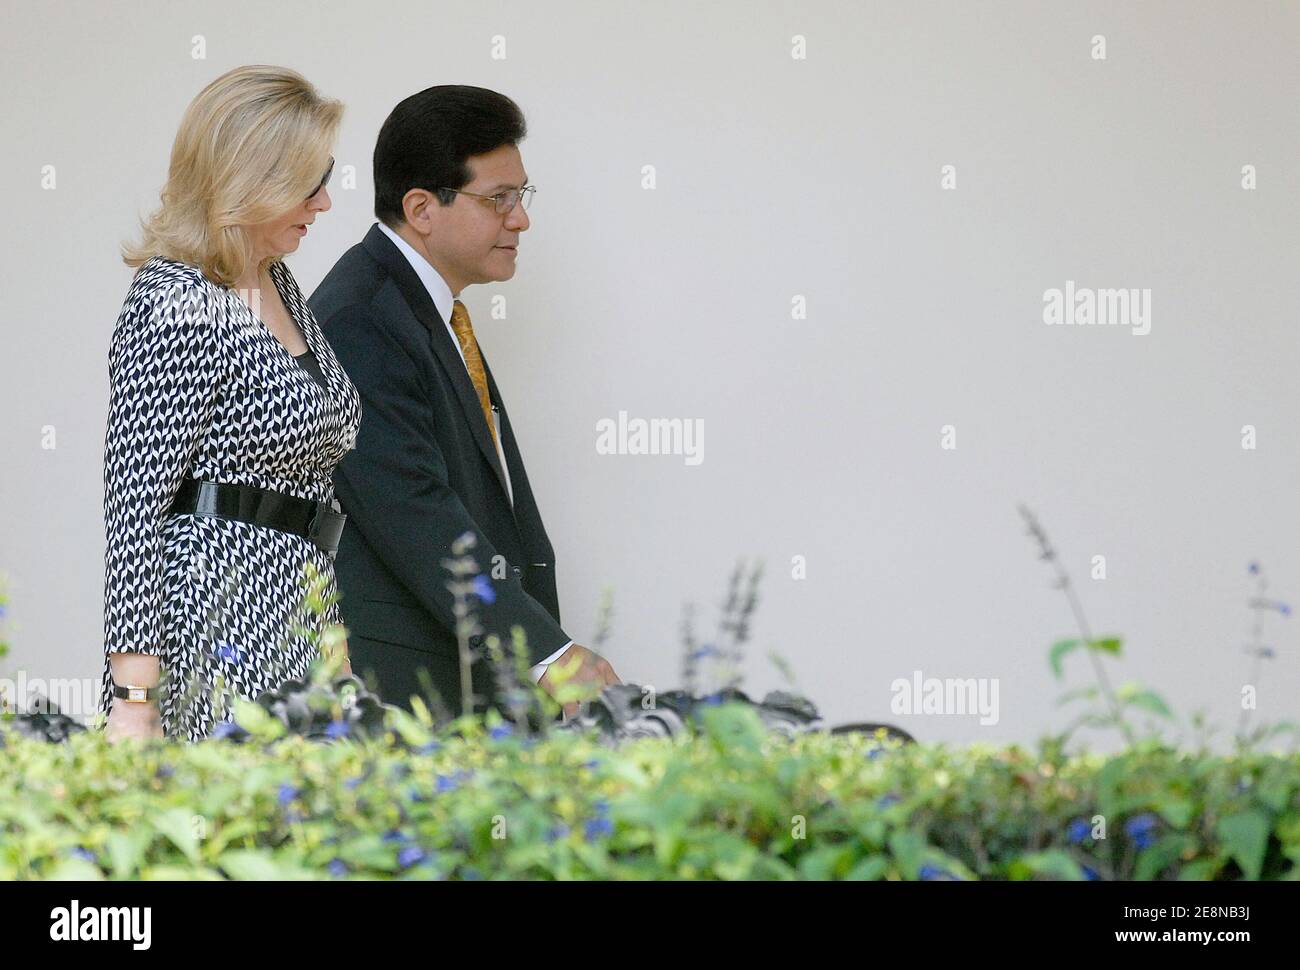 U.S. Attorney General Alberto Gonzales and his wife Rebecca walk in the White House, in Washington, DC, USA, on August 9, 2007. Bush will meet with French President Nicolas Sarkozy this weekend in Kennebunkport, Maine. Photo by Olivier Douliery/ABACAPRESS.COM Stock Photo